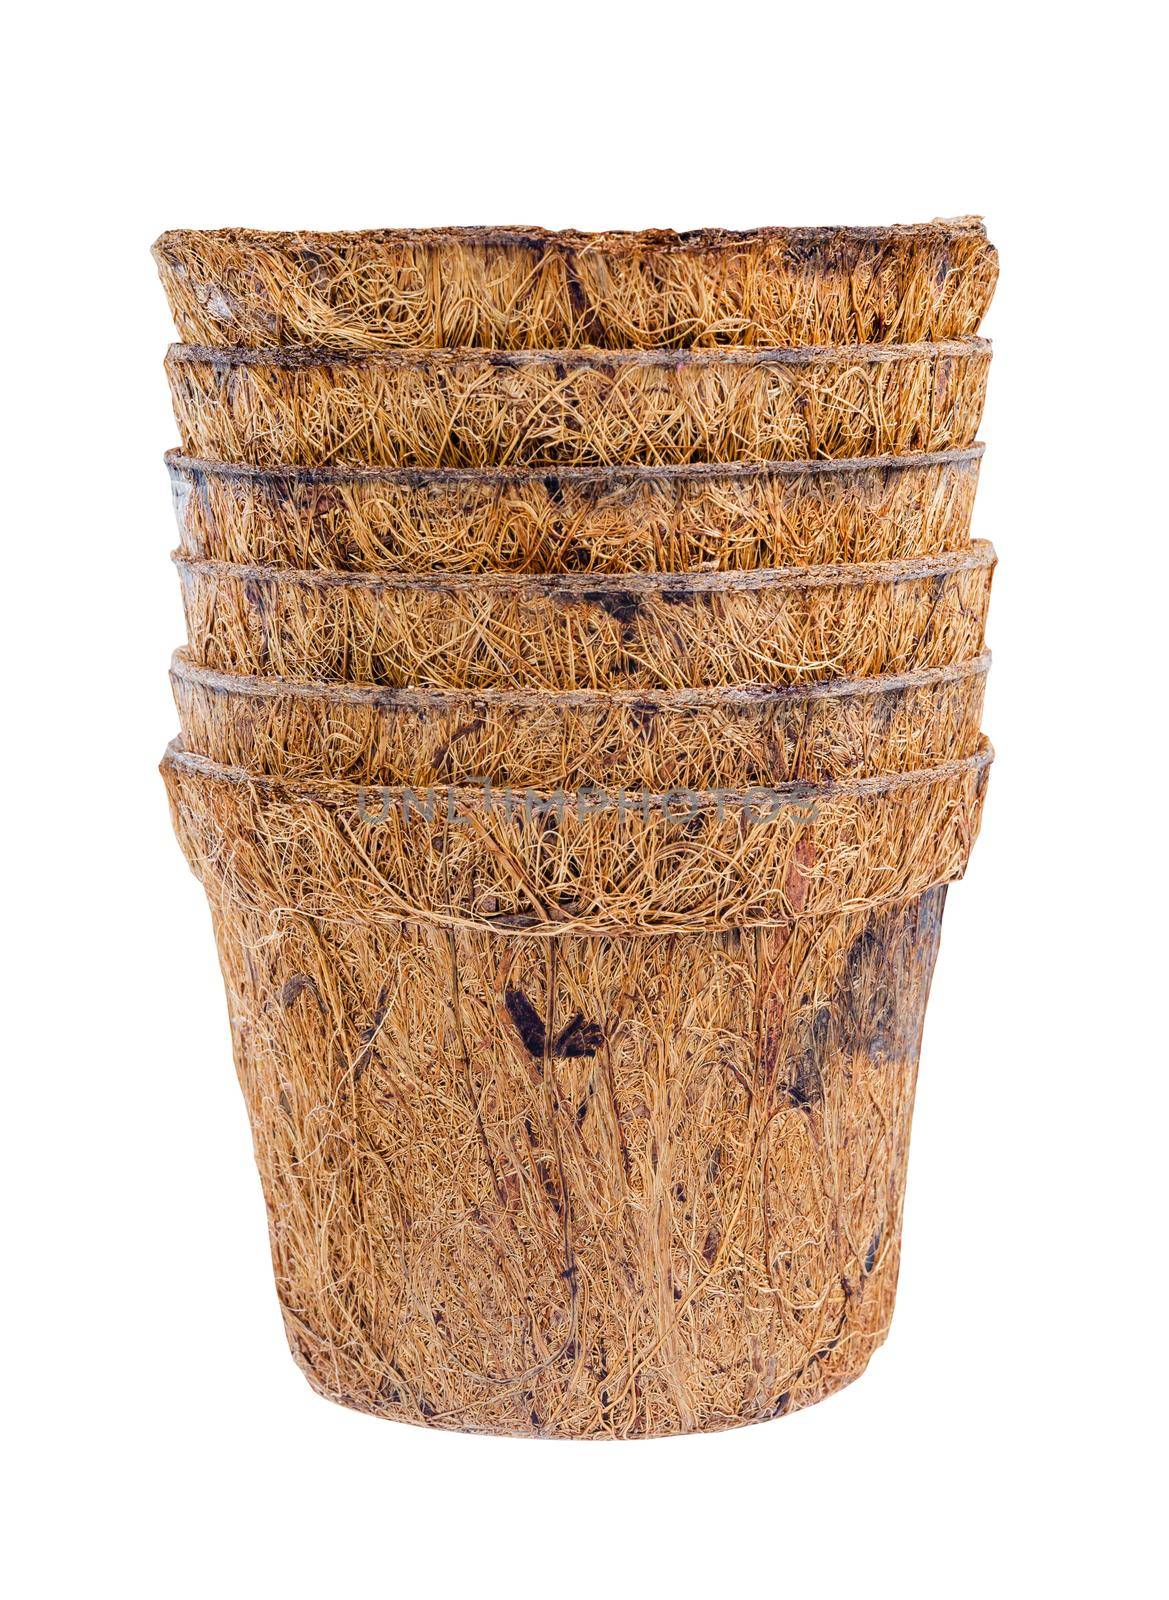 Plant pot, Coconut fiber plant isolated on a white background clipping path. Reduce global warming. Organic.